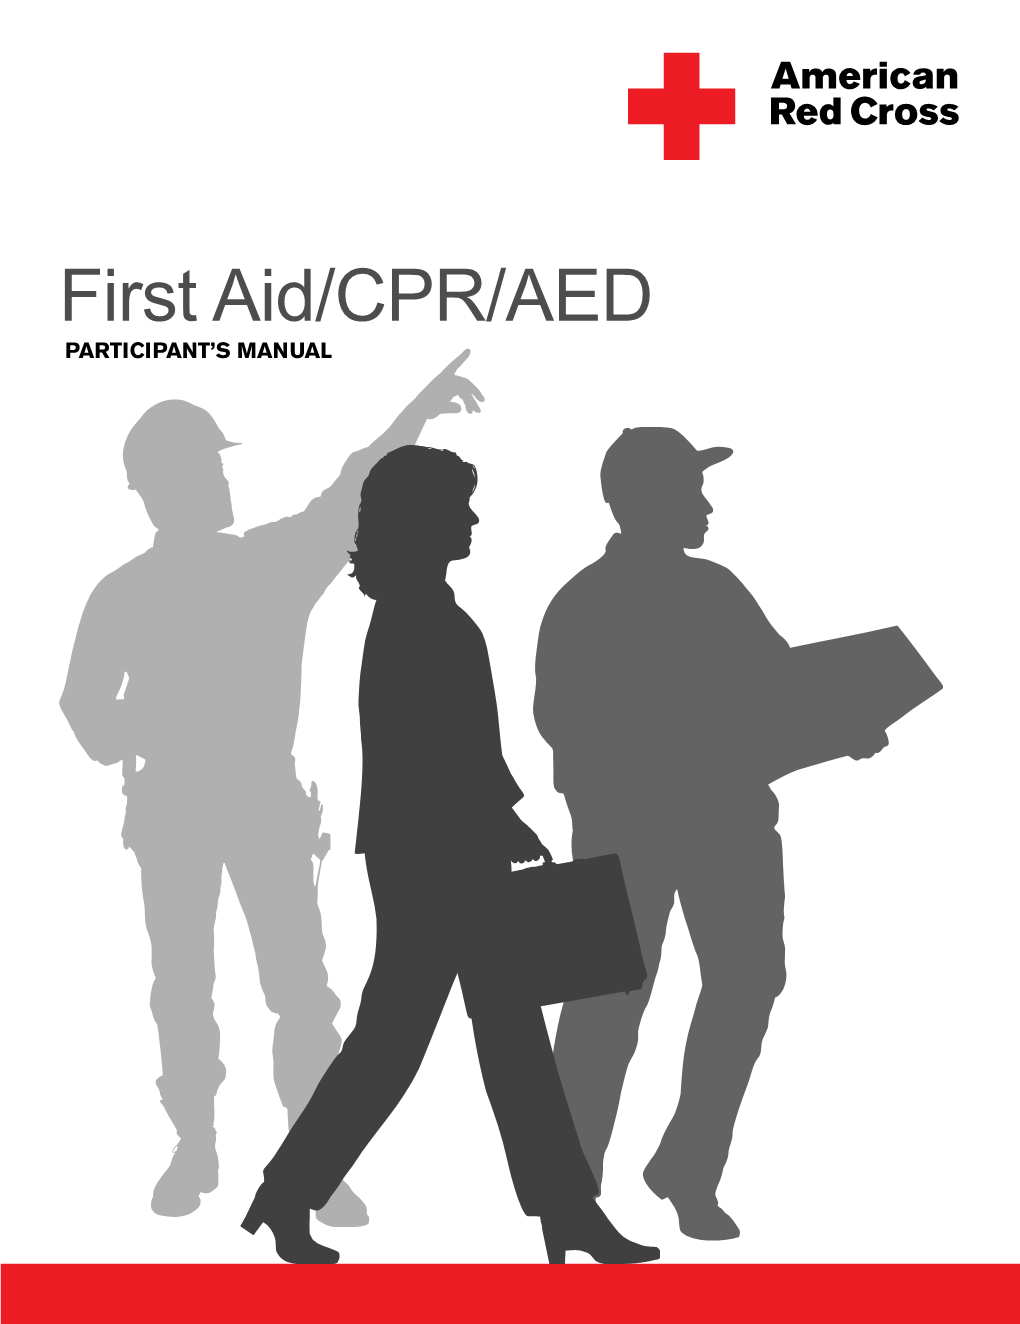 First Aid/CPR/AED PARTICIPANT’S MANUAL Table of Contents